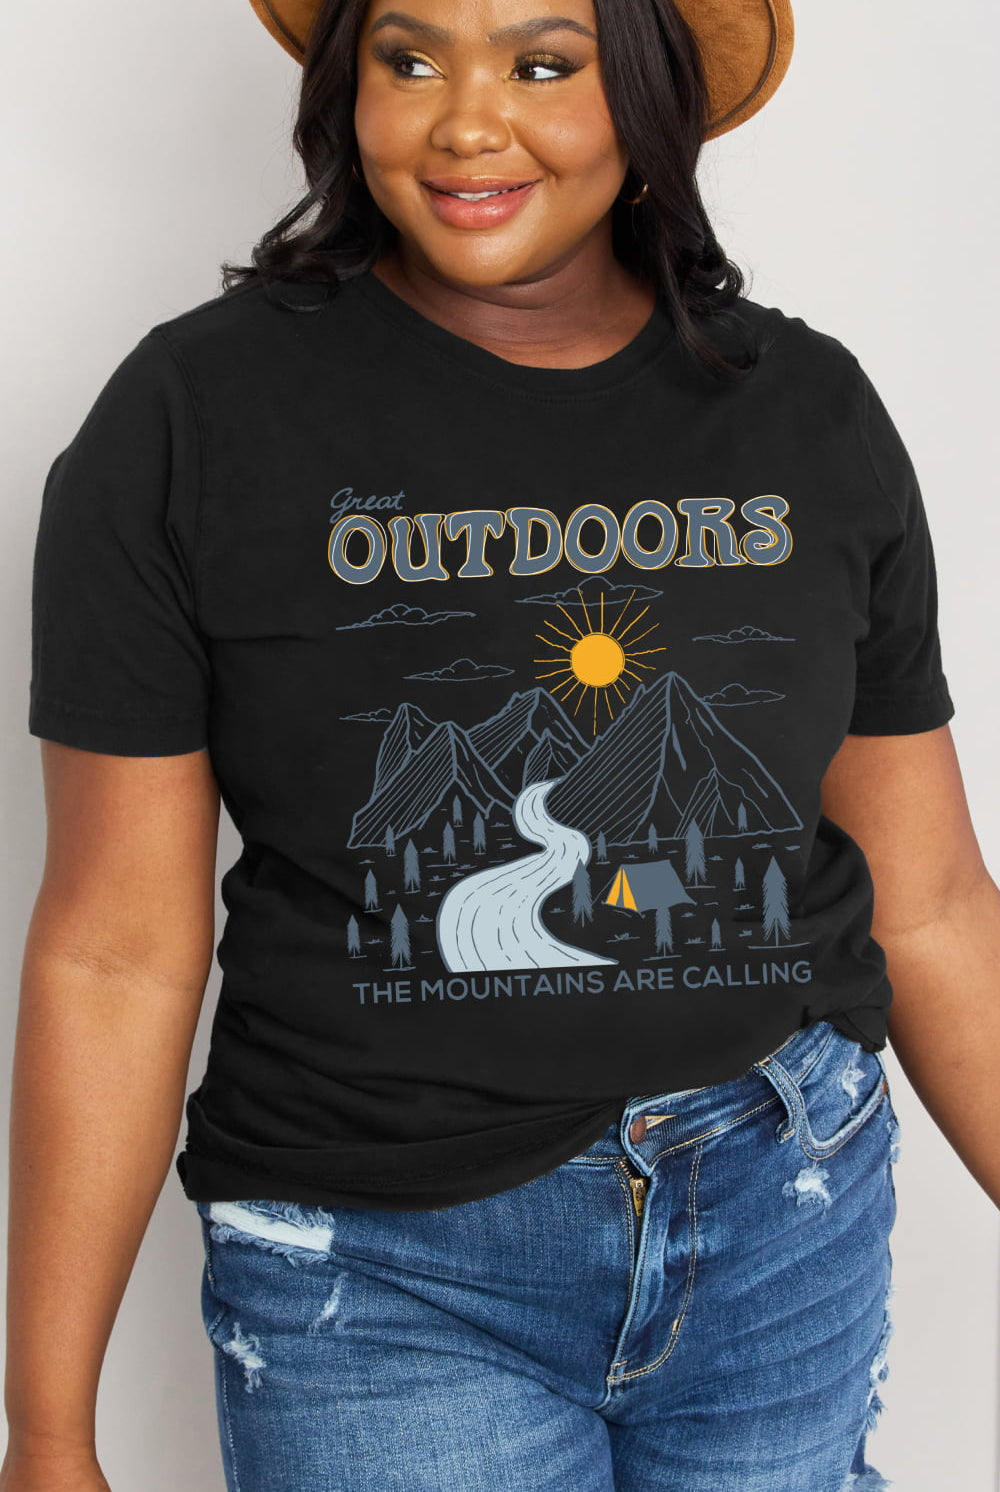 Dark Slate Gray Simply Love Full Size GREAT OUTDOORS Graphic Cotton Tee Tops